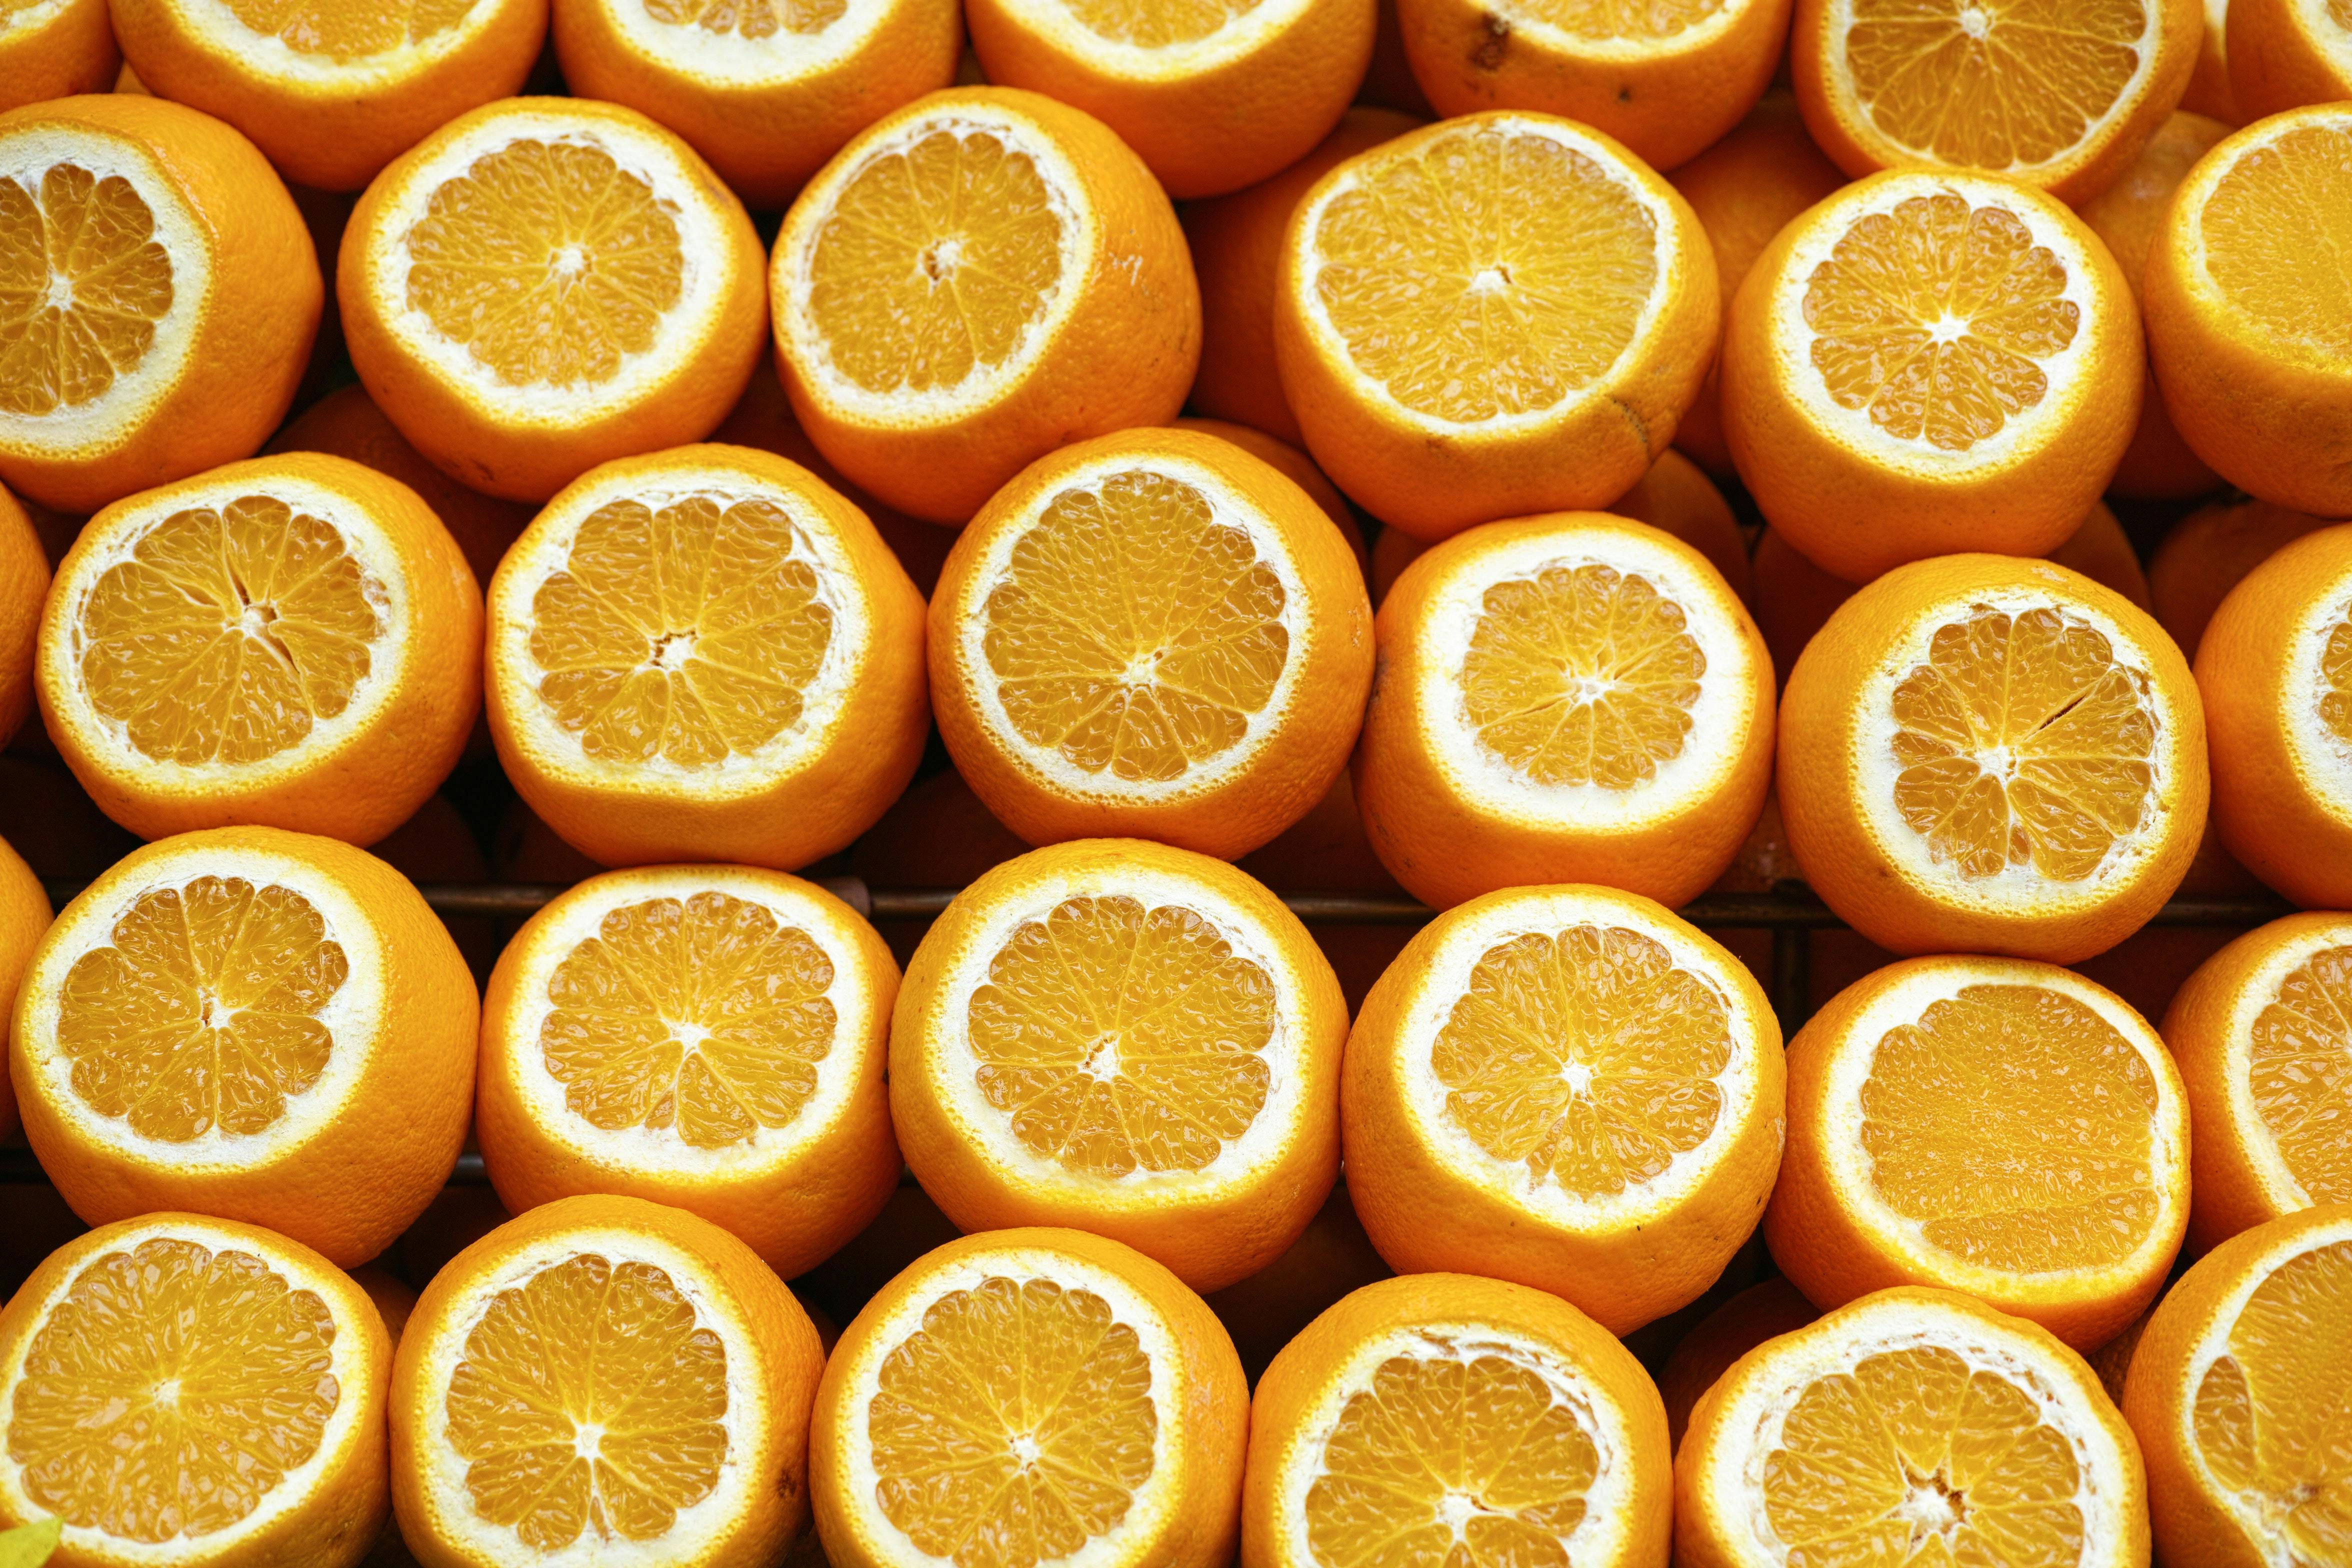 Oranges laid out and cut in half